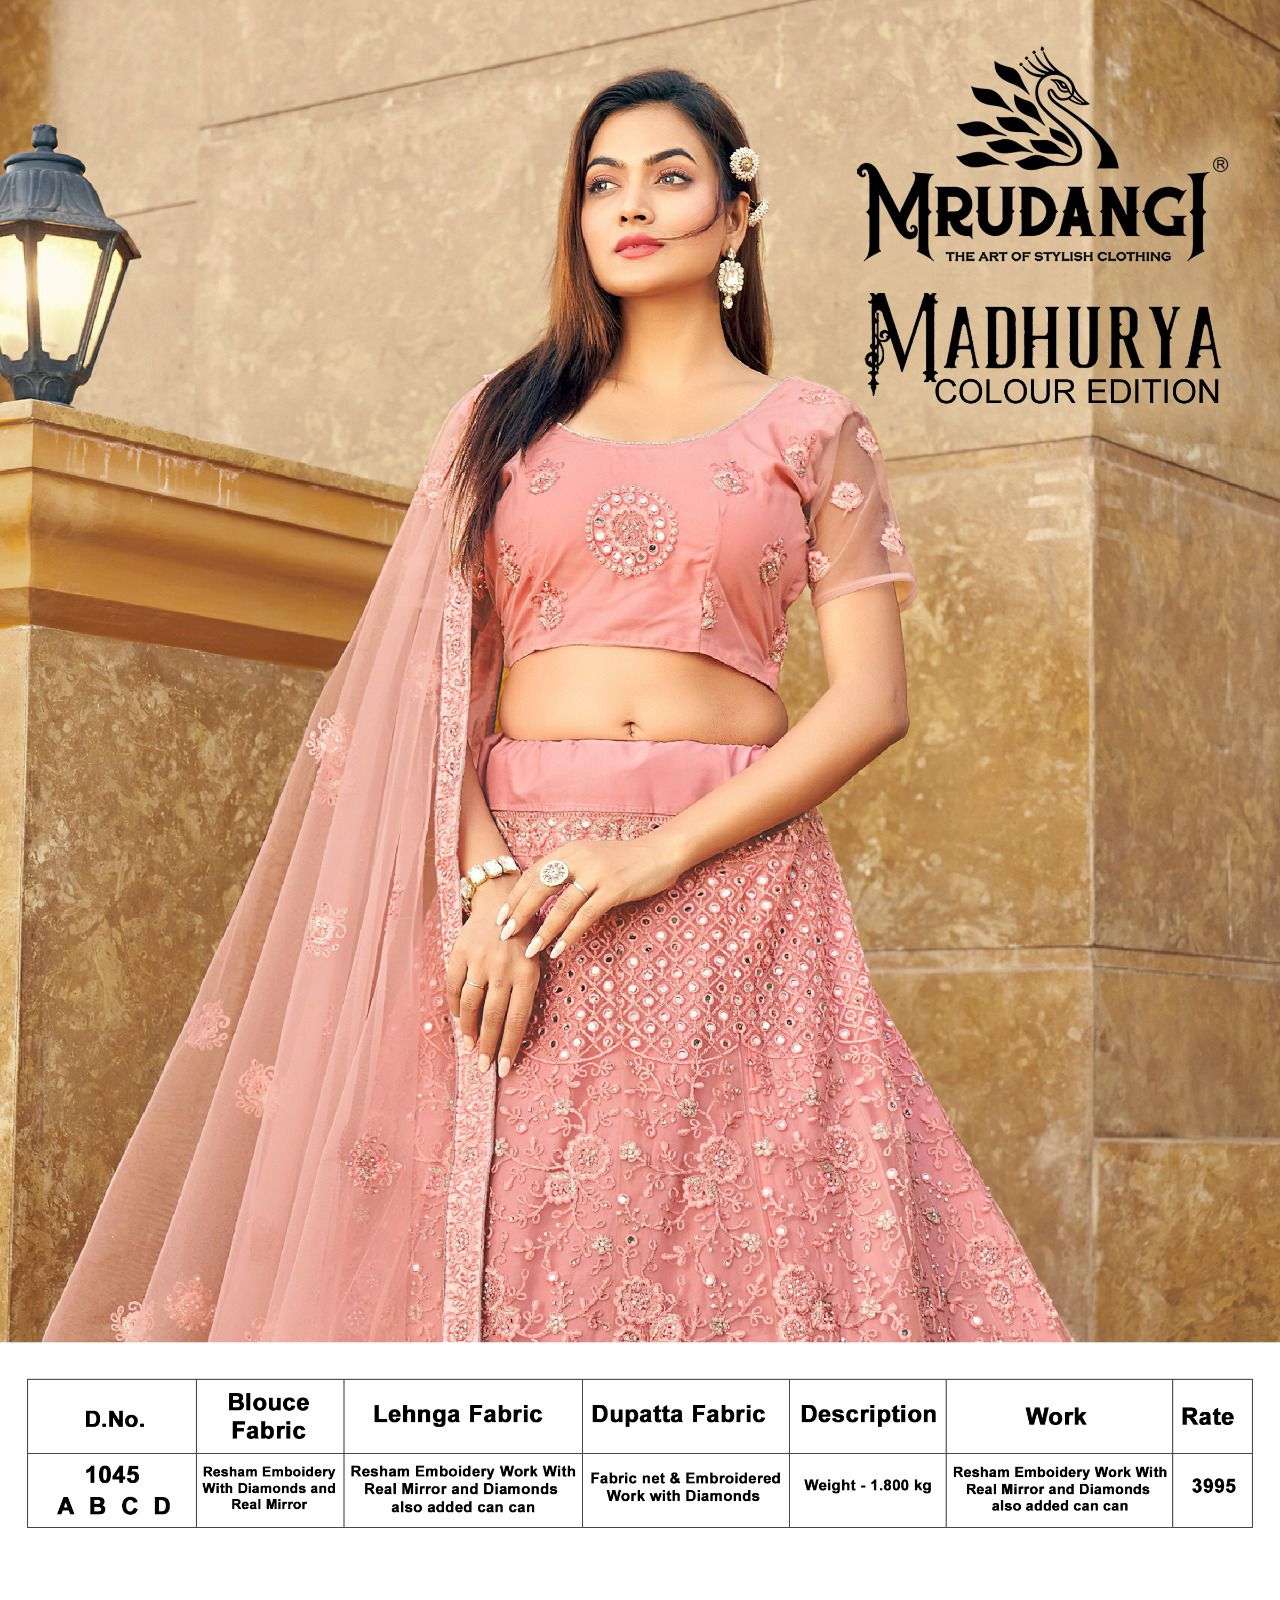 Madhurya 1045 Colours By Mrudangi 1045 To 1045-D Series Bridal Wear Collection Beautiful Stylish Colorful Fancy Party Wear & Occasional Wear Silk Lehengas At Wholesale Price